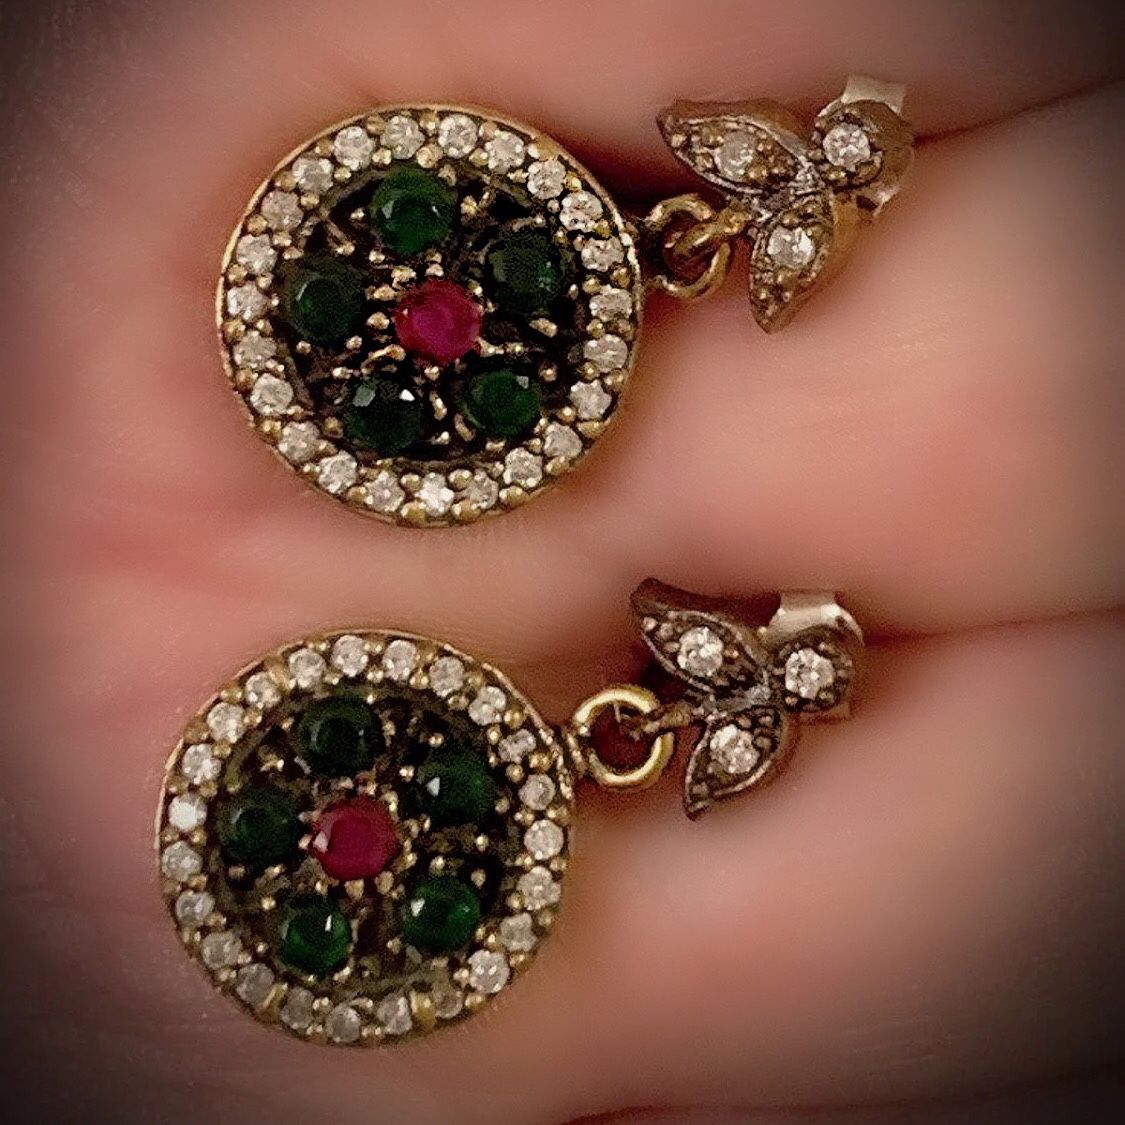 PIGEON BLOOD RED RUBY EMERALD FINE ART EARRINGS Solid 925 Sterling Silver/Gold WOW! Brilliant Facet Round Cut Gems, Diamond Topaz M5148 V